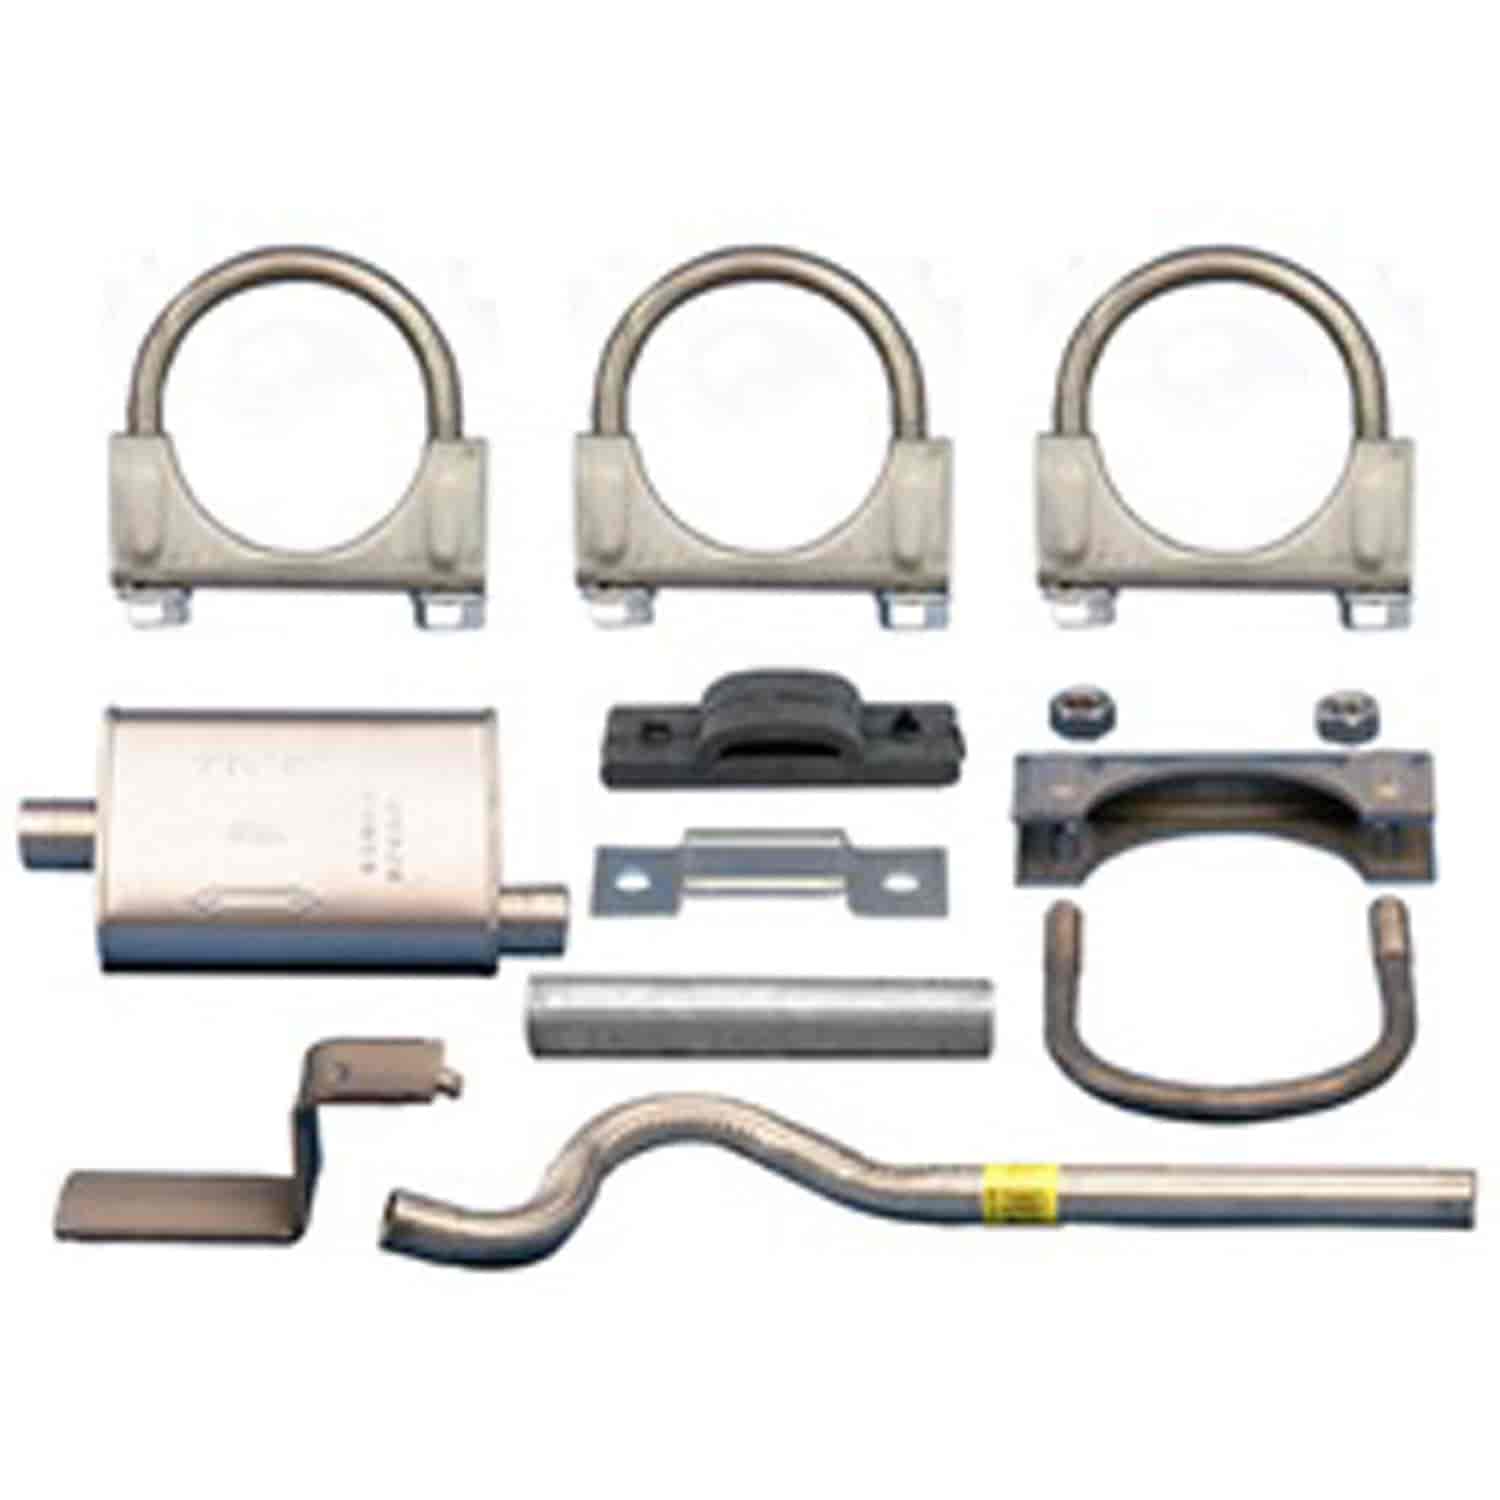 Muffler and Tailpipe Kit Includes Clamps and Hangers